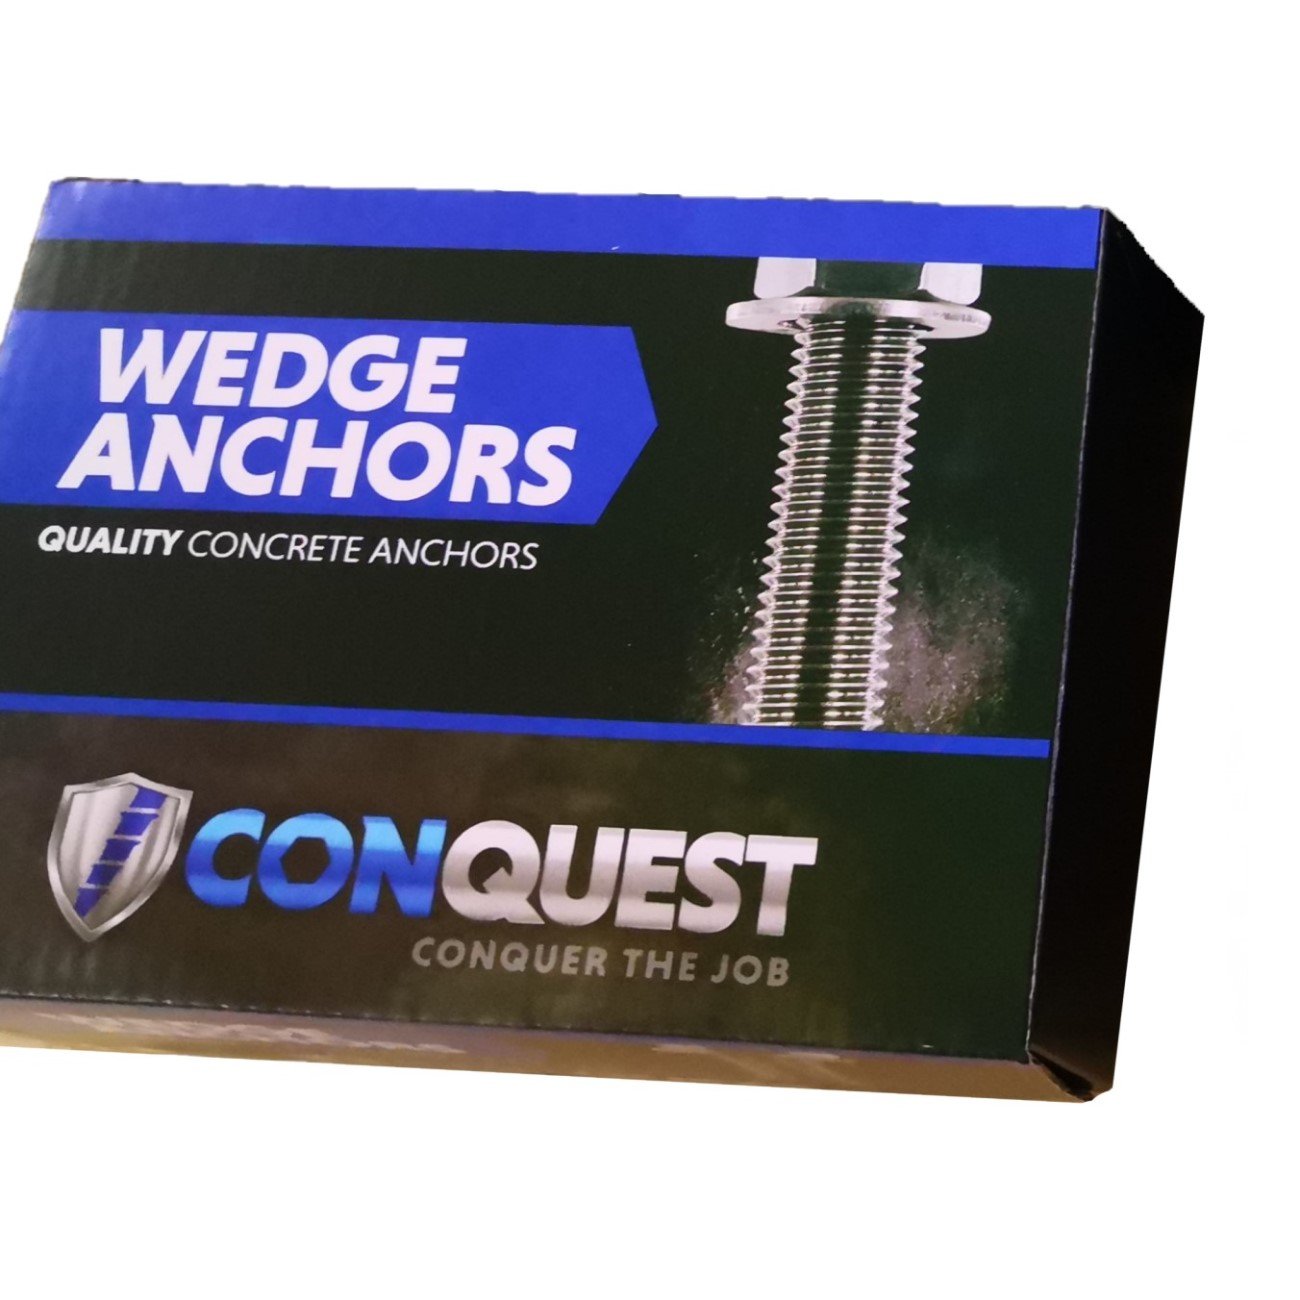 5/8" x 4-1/2" Conquest Wedge Anchors - 304 Stainless Steel, Pkg 25